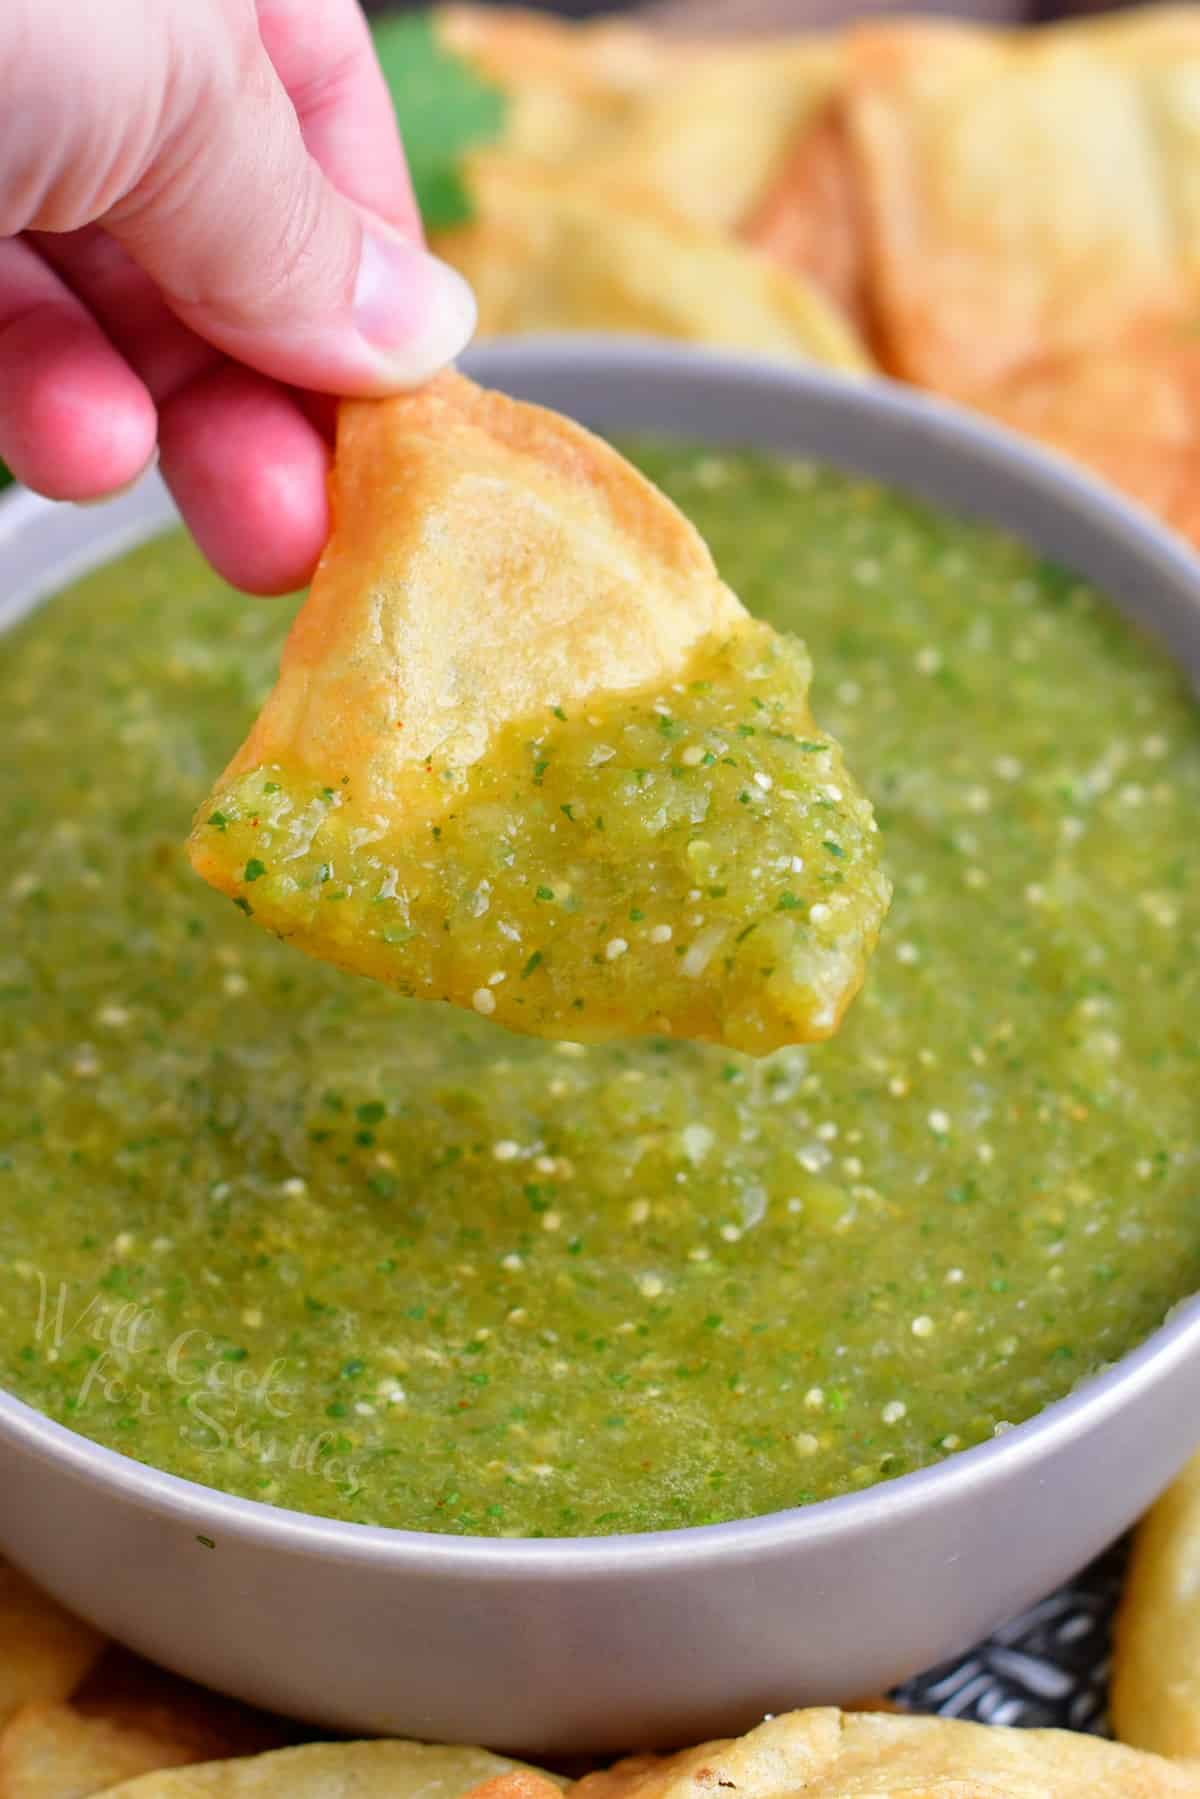 A chip is scooping a bite sized portion of salsa from the bowl.